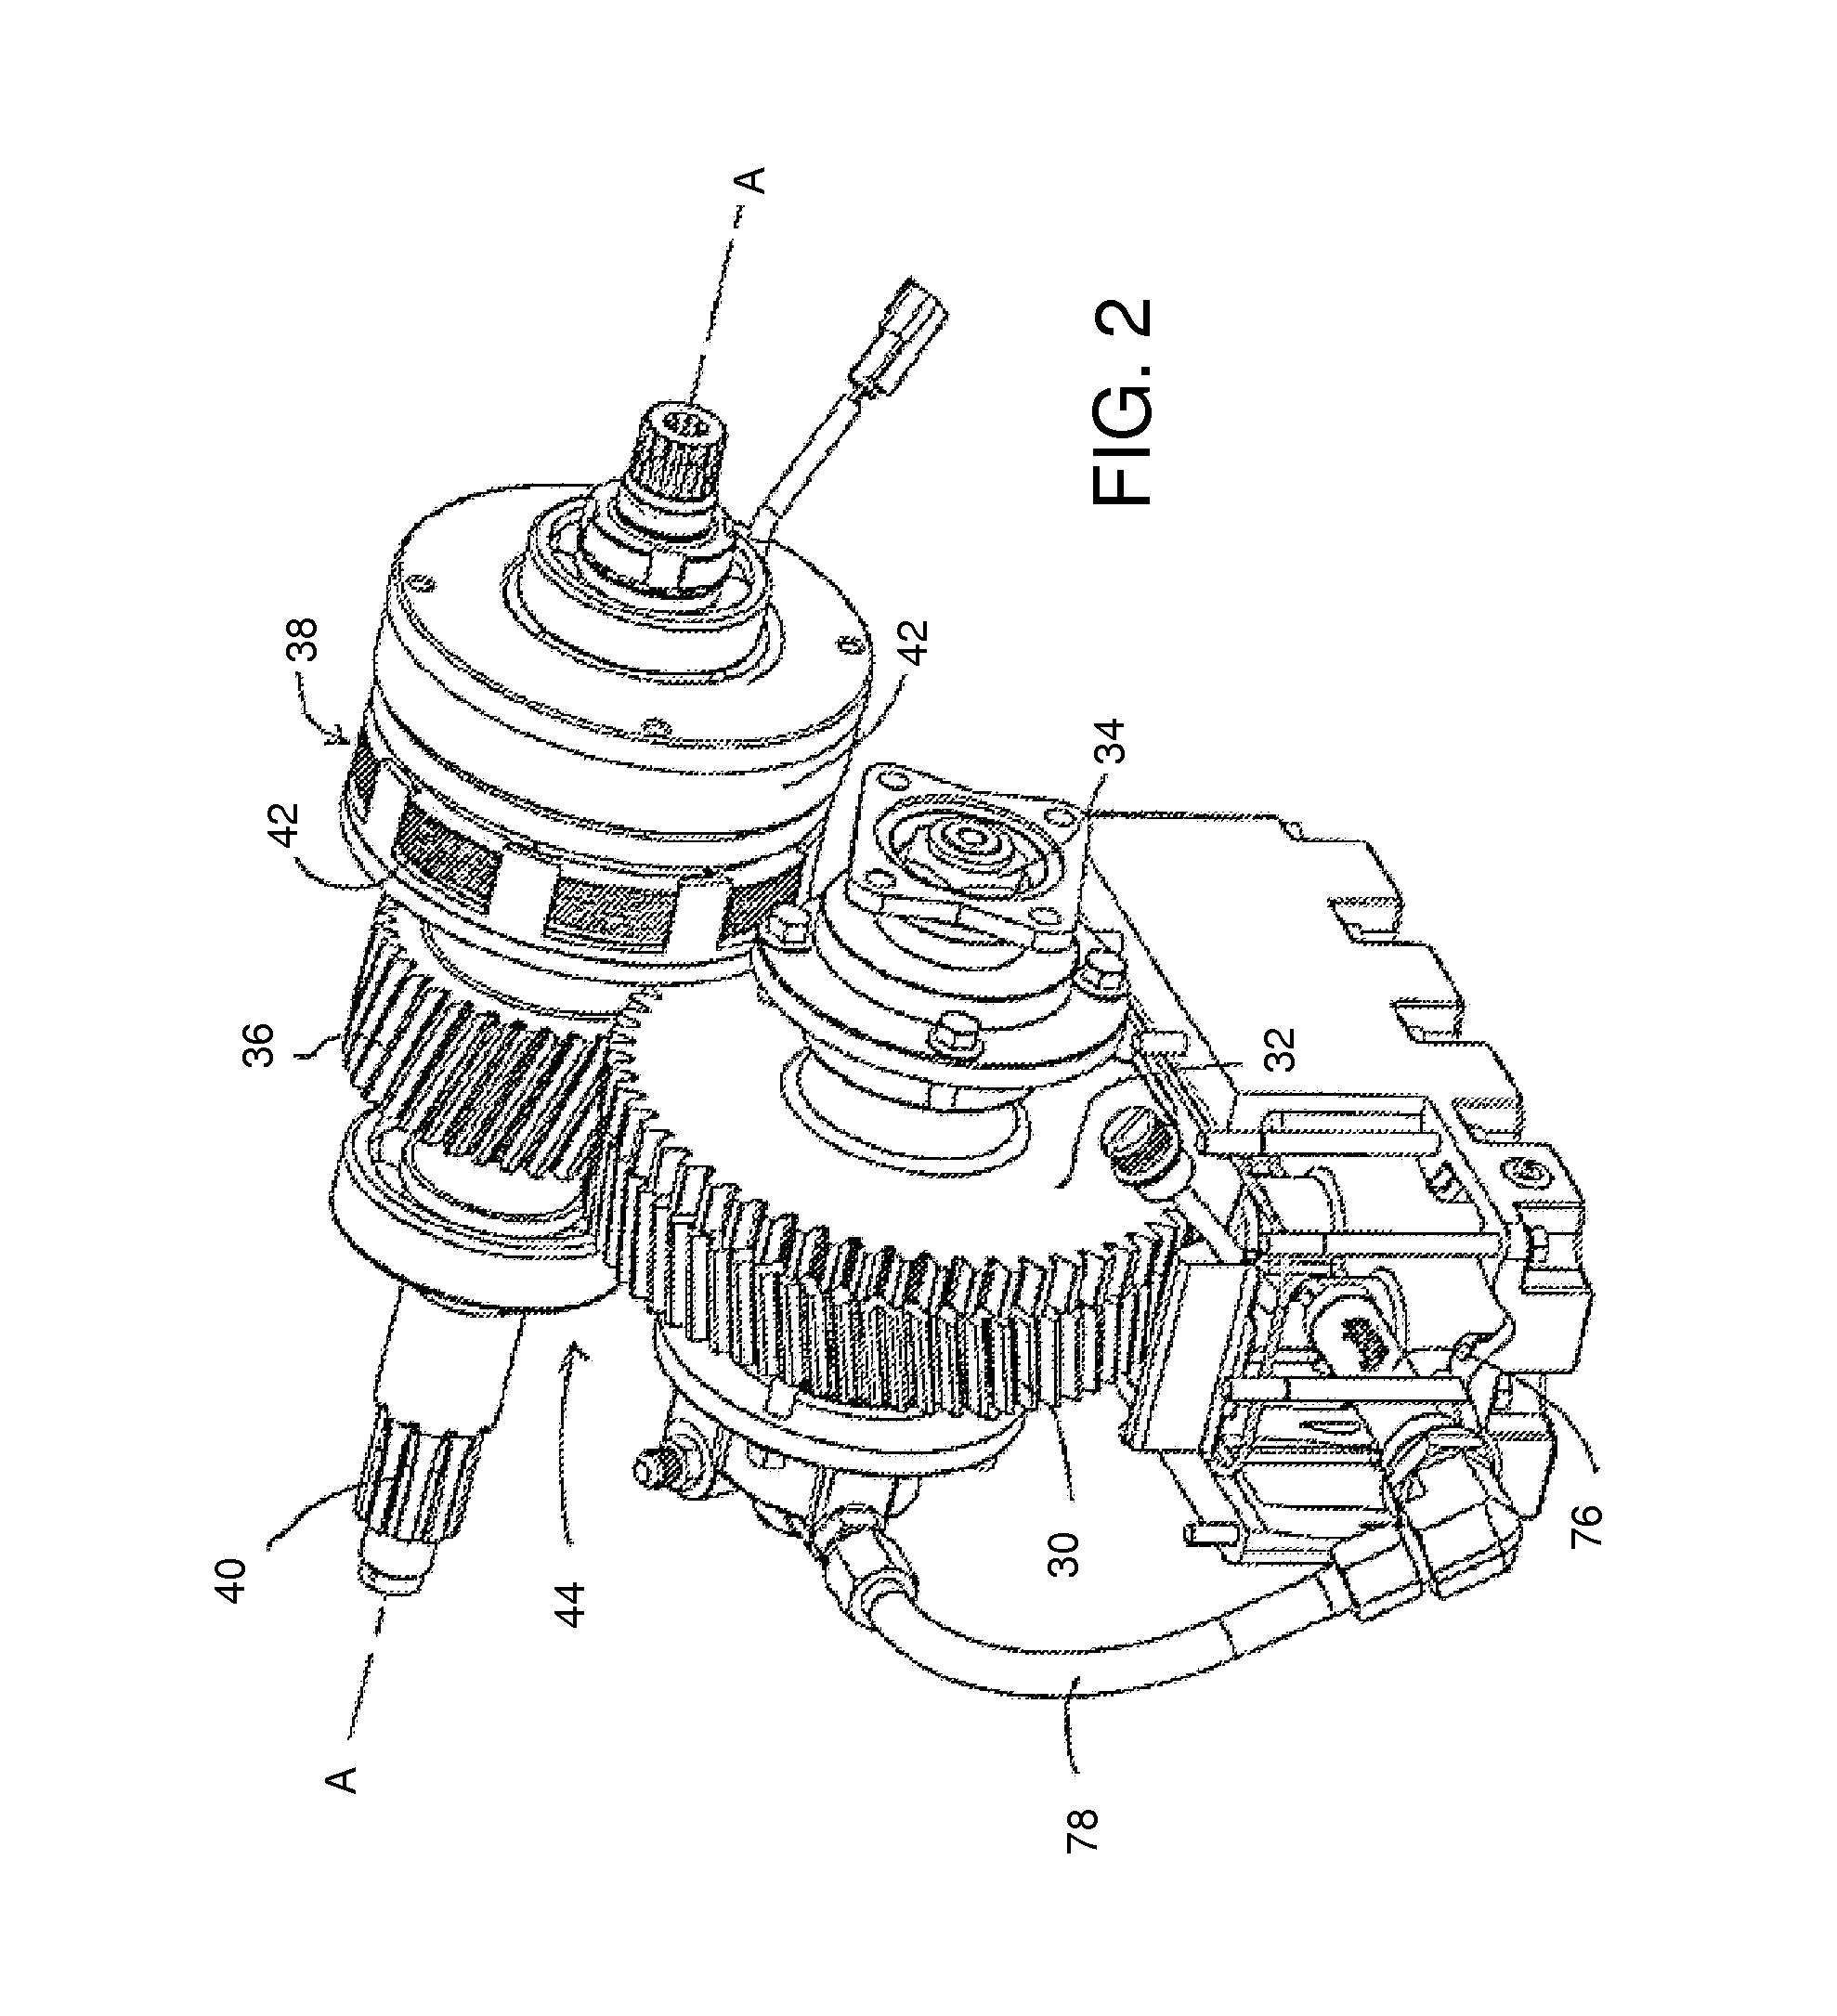 Pump transmission with PTO gear and independently clutched impeller